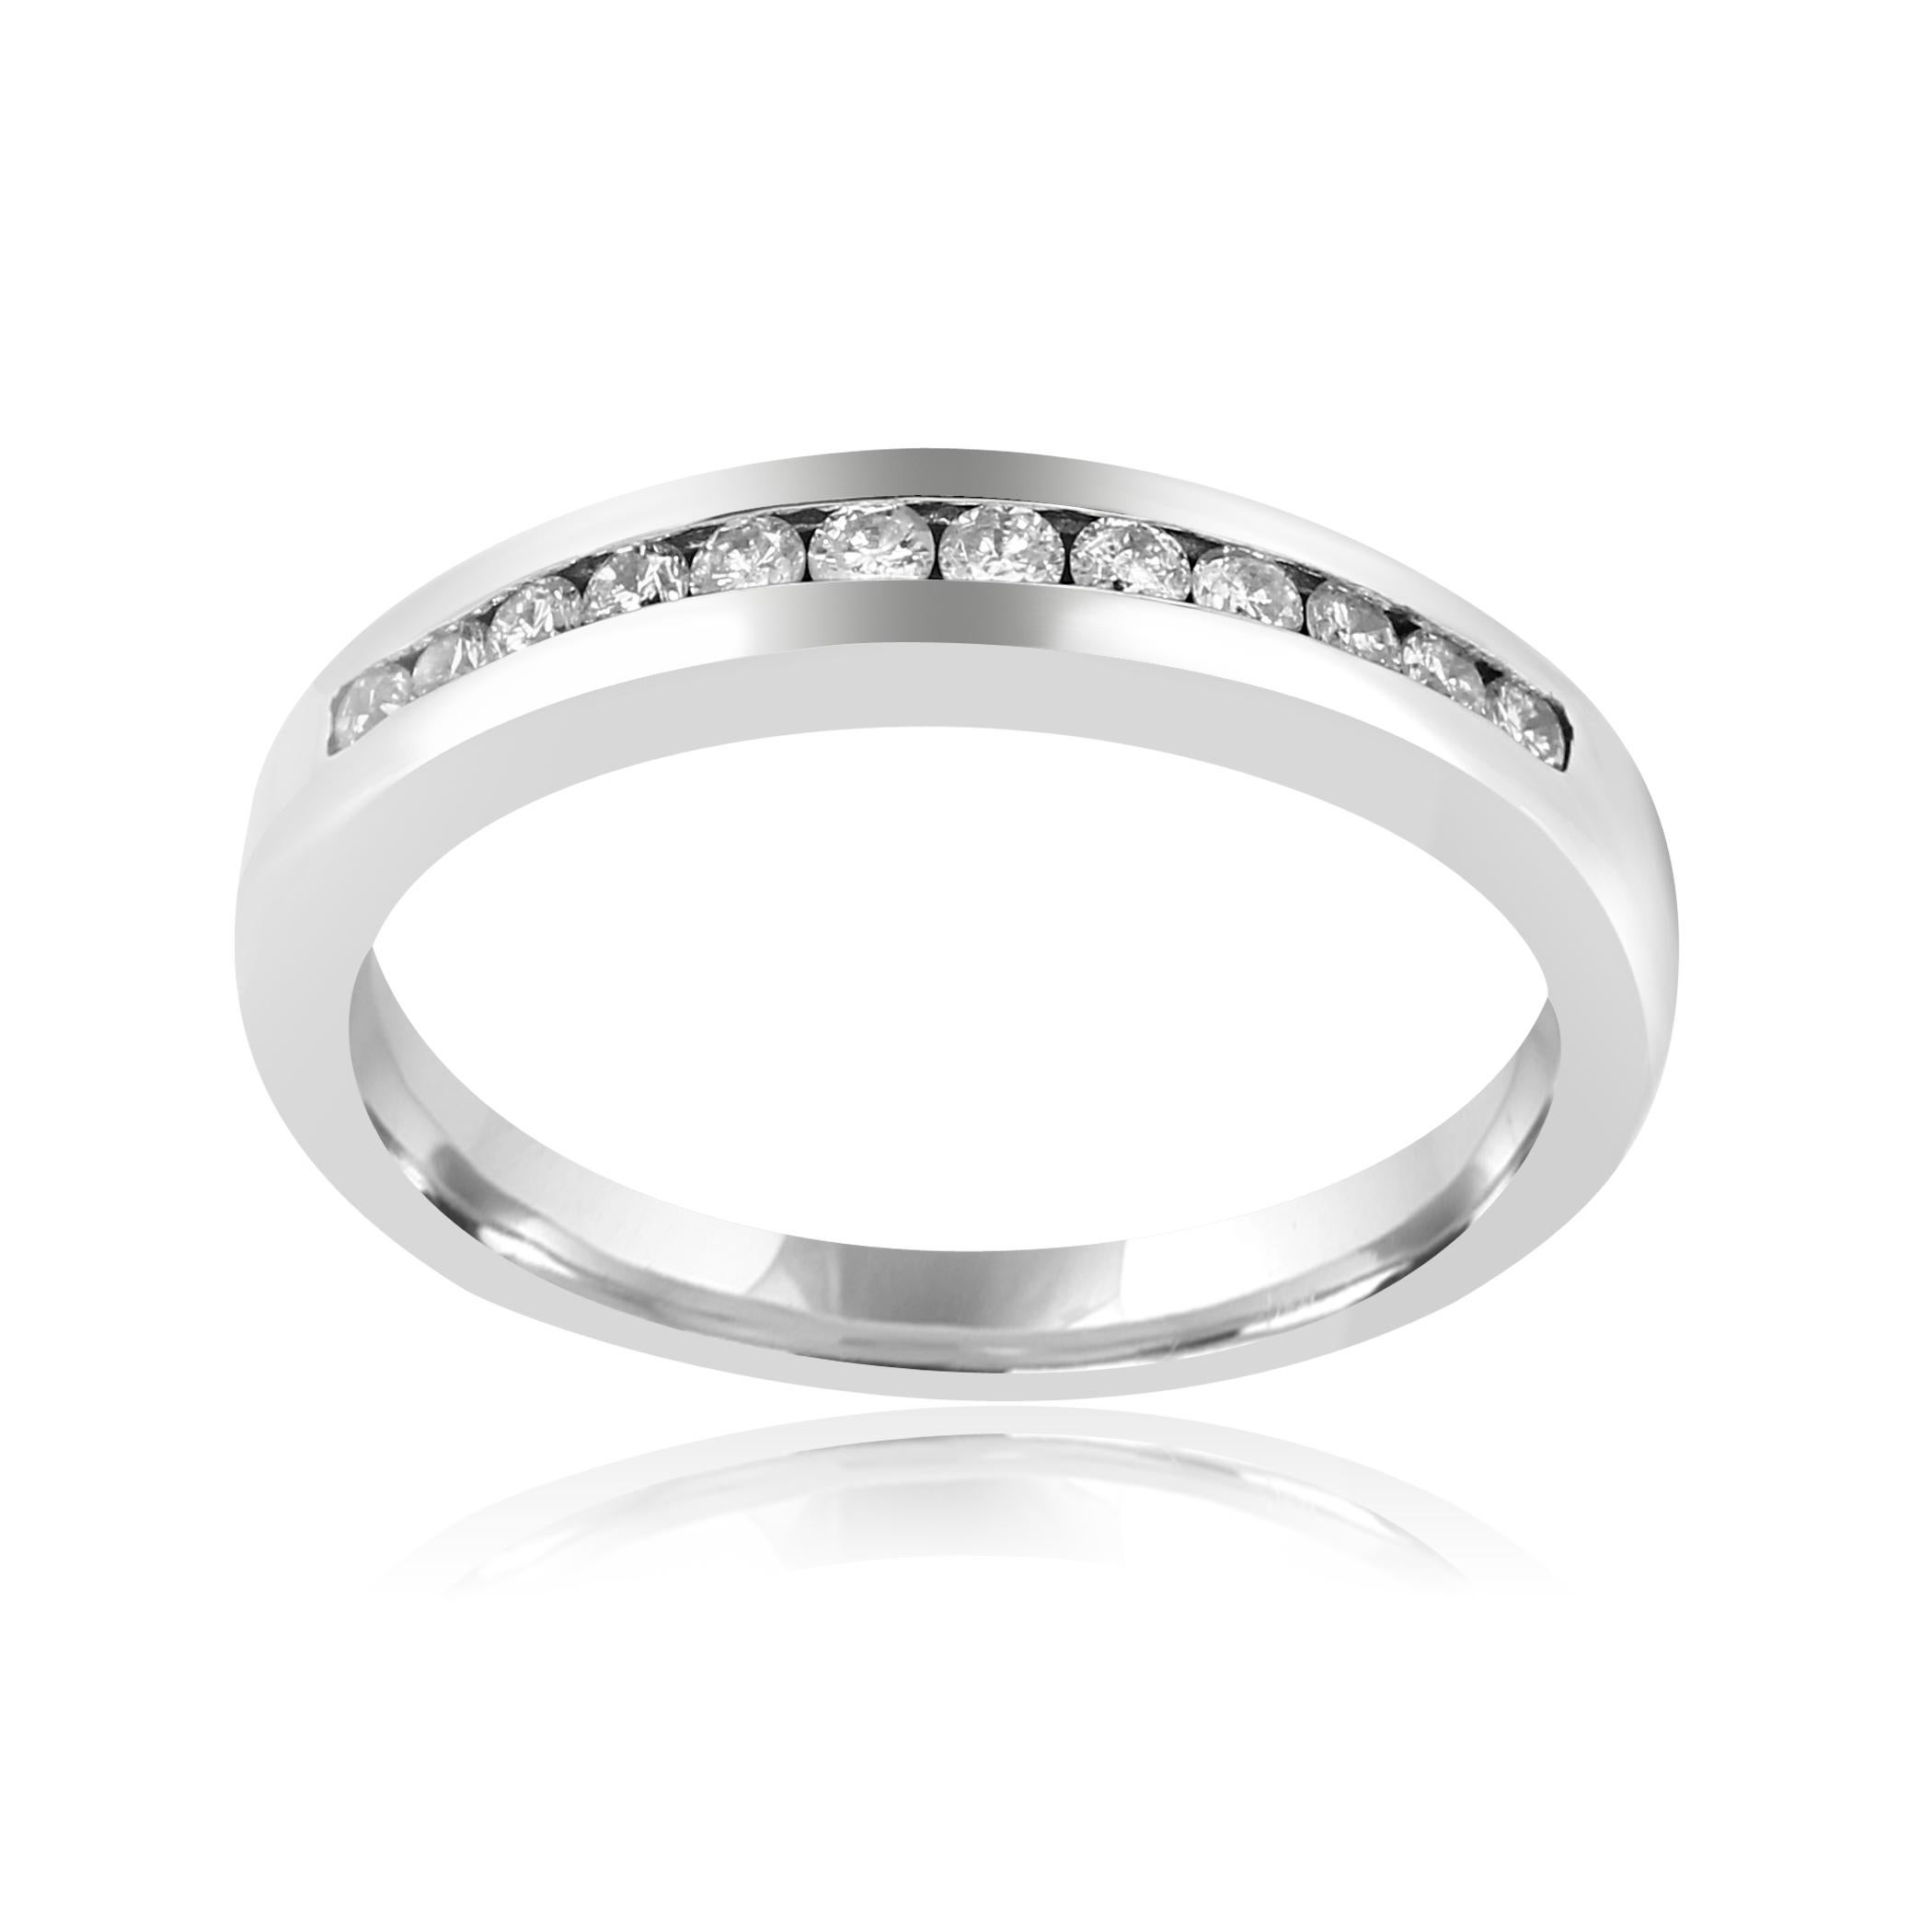 18 White G-H Color SI-I Diamond Round 0.25 Carat Channel Set in 14K White Gold Bridal Fashion Cocktail Band Ring.

Style available in different price ranges. Prices are based on your selection of 4C's i.e Cut, Color, Carat, Clarity. Please contact